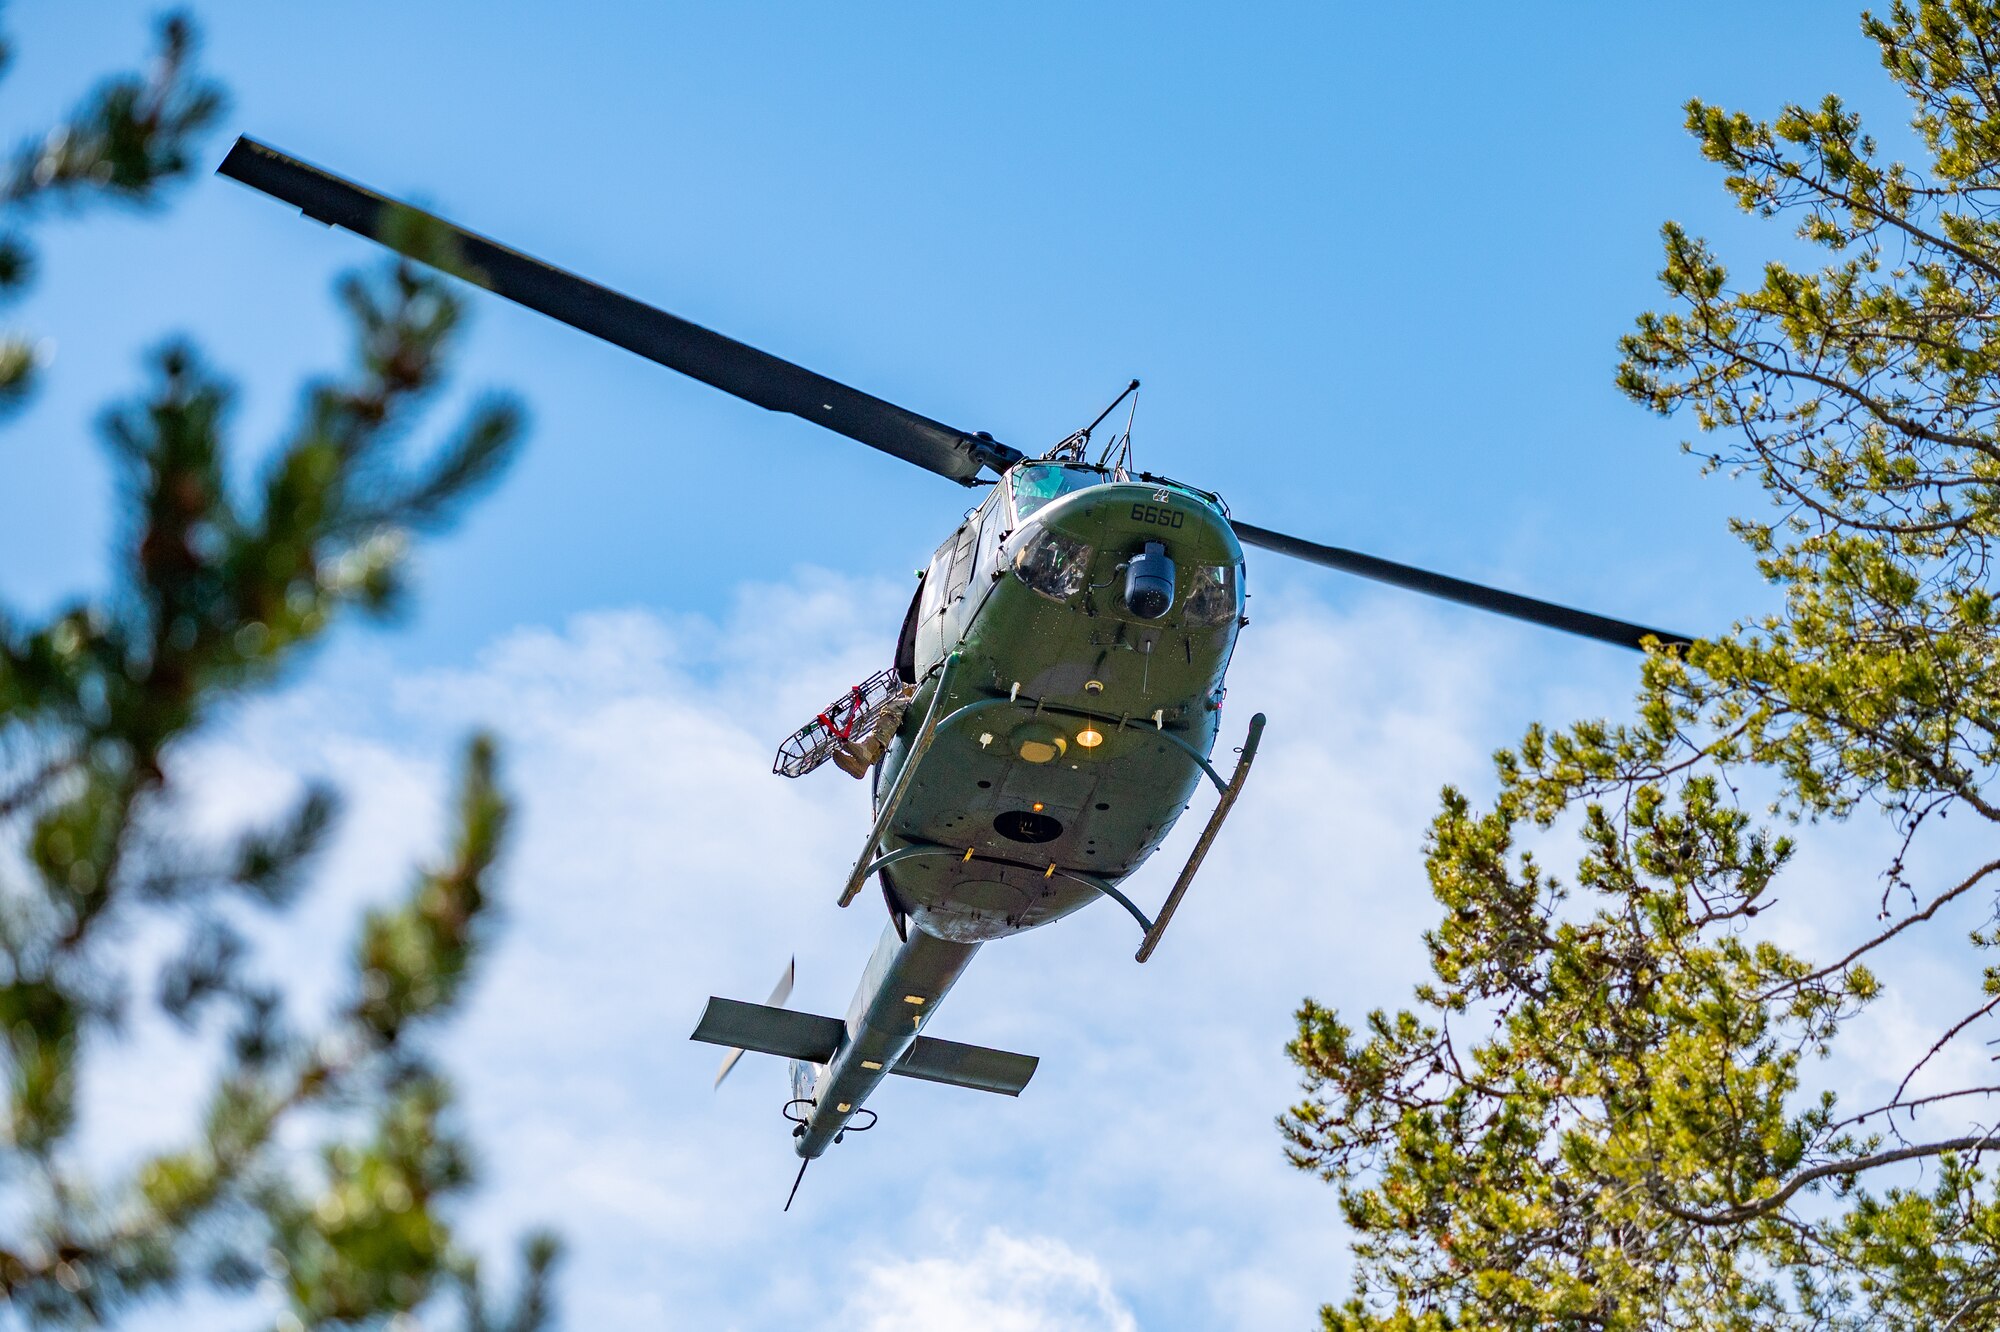 A UH-N1 Huey from the 40th Helicopter Squadron makes its way to the location of an injured hiker during a search and rescue exercise May 24, 2022, over the Highwood Mountains near Great Falls, Mont.